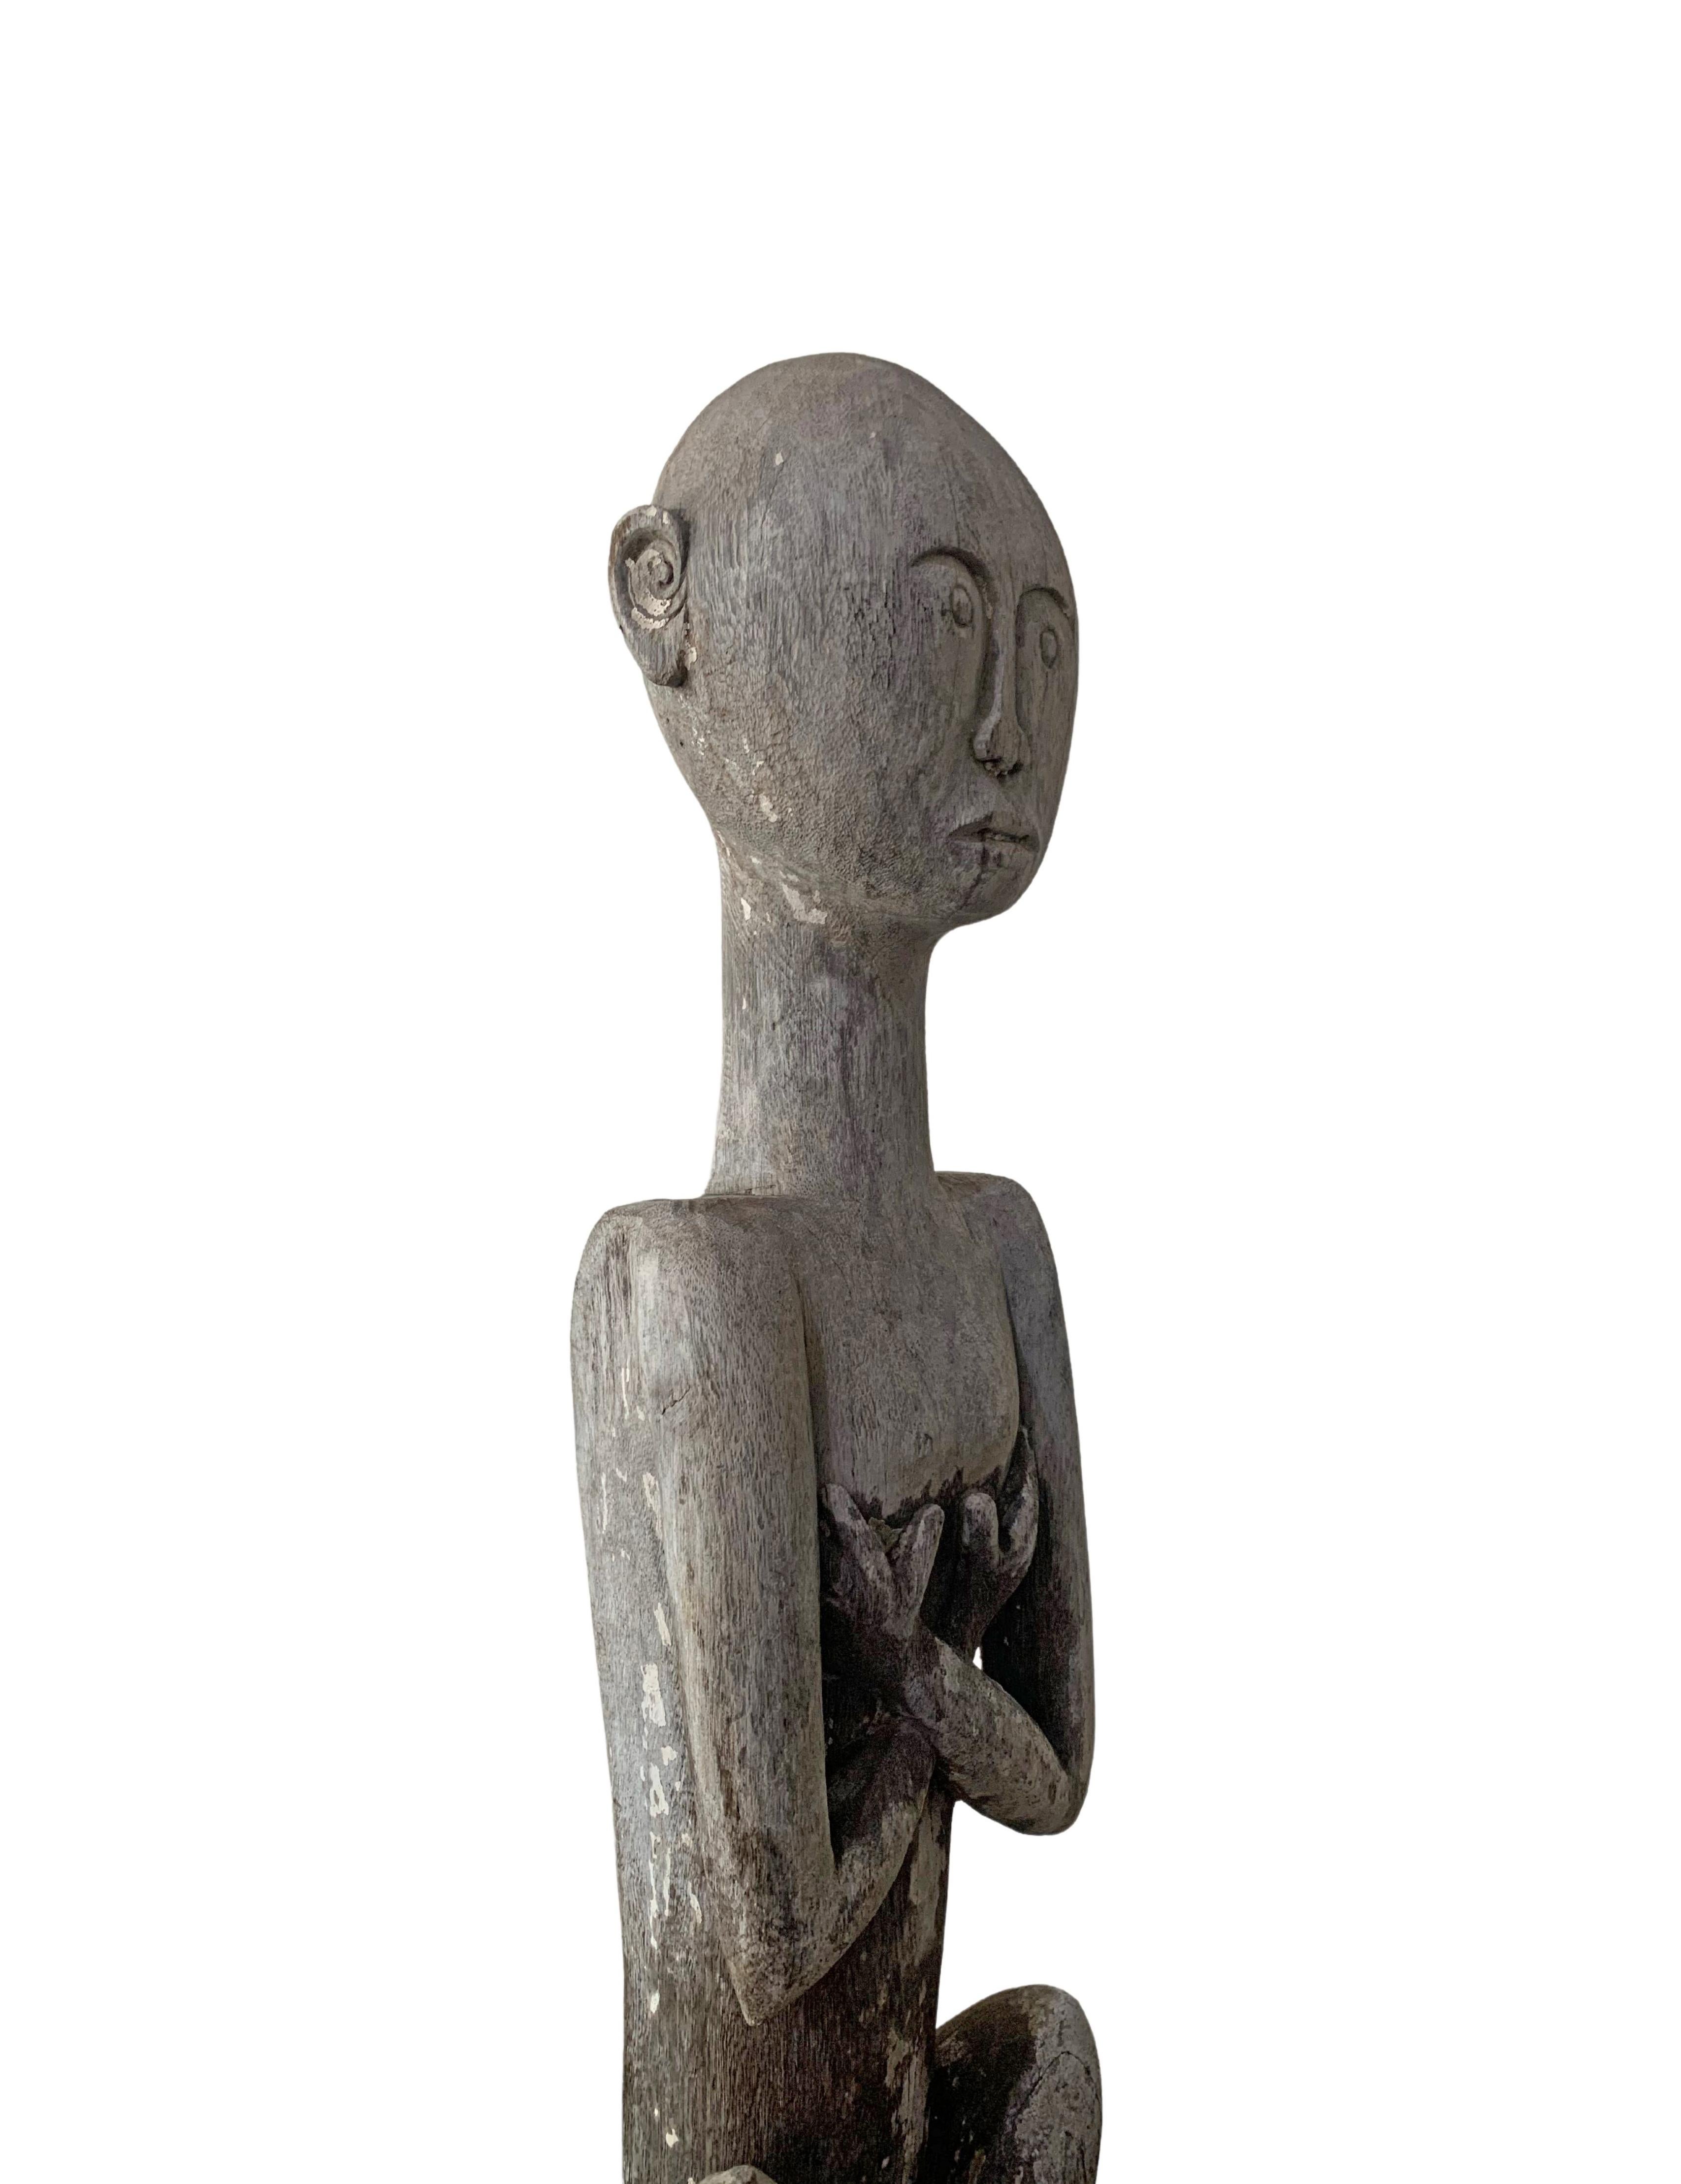 Hardwood Wooden Tribal Sculpture / Carving of Ancestral Figure, Sumba Island, Indonesia